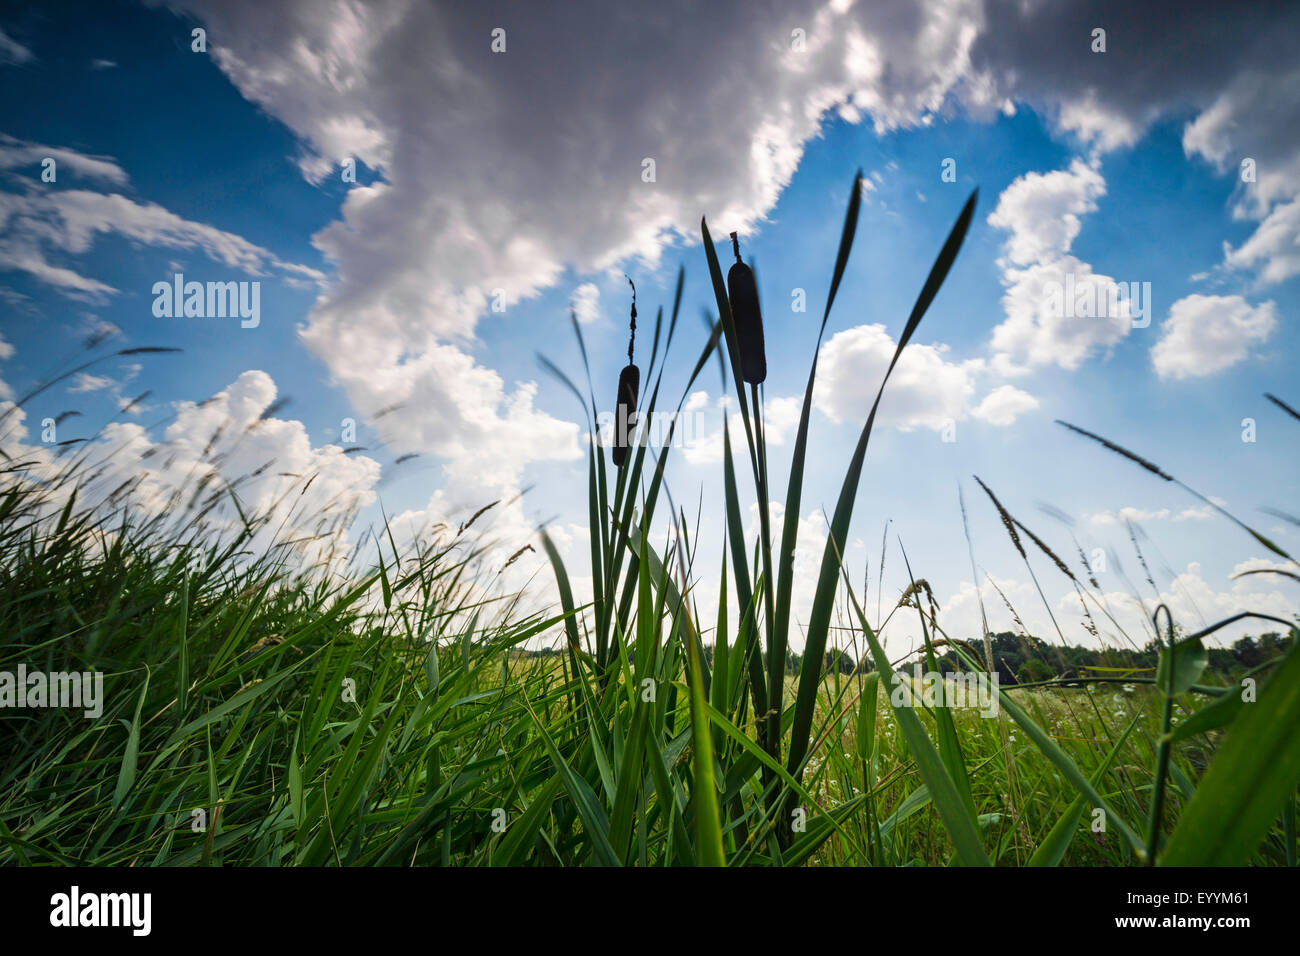 common cattail, broad-leaved cattail, broad-leaved cat's tail, great reedmace, bulrush (Typha latifolia), worms-eye view with cloudy sky, Germany, Brandenburg, Templin Stock Photo